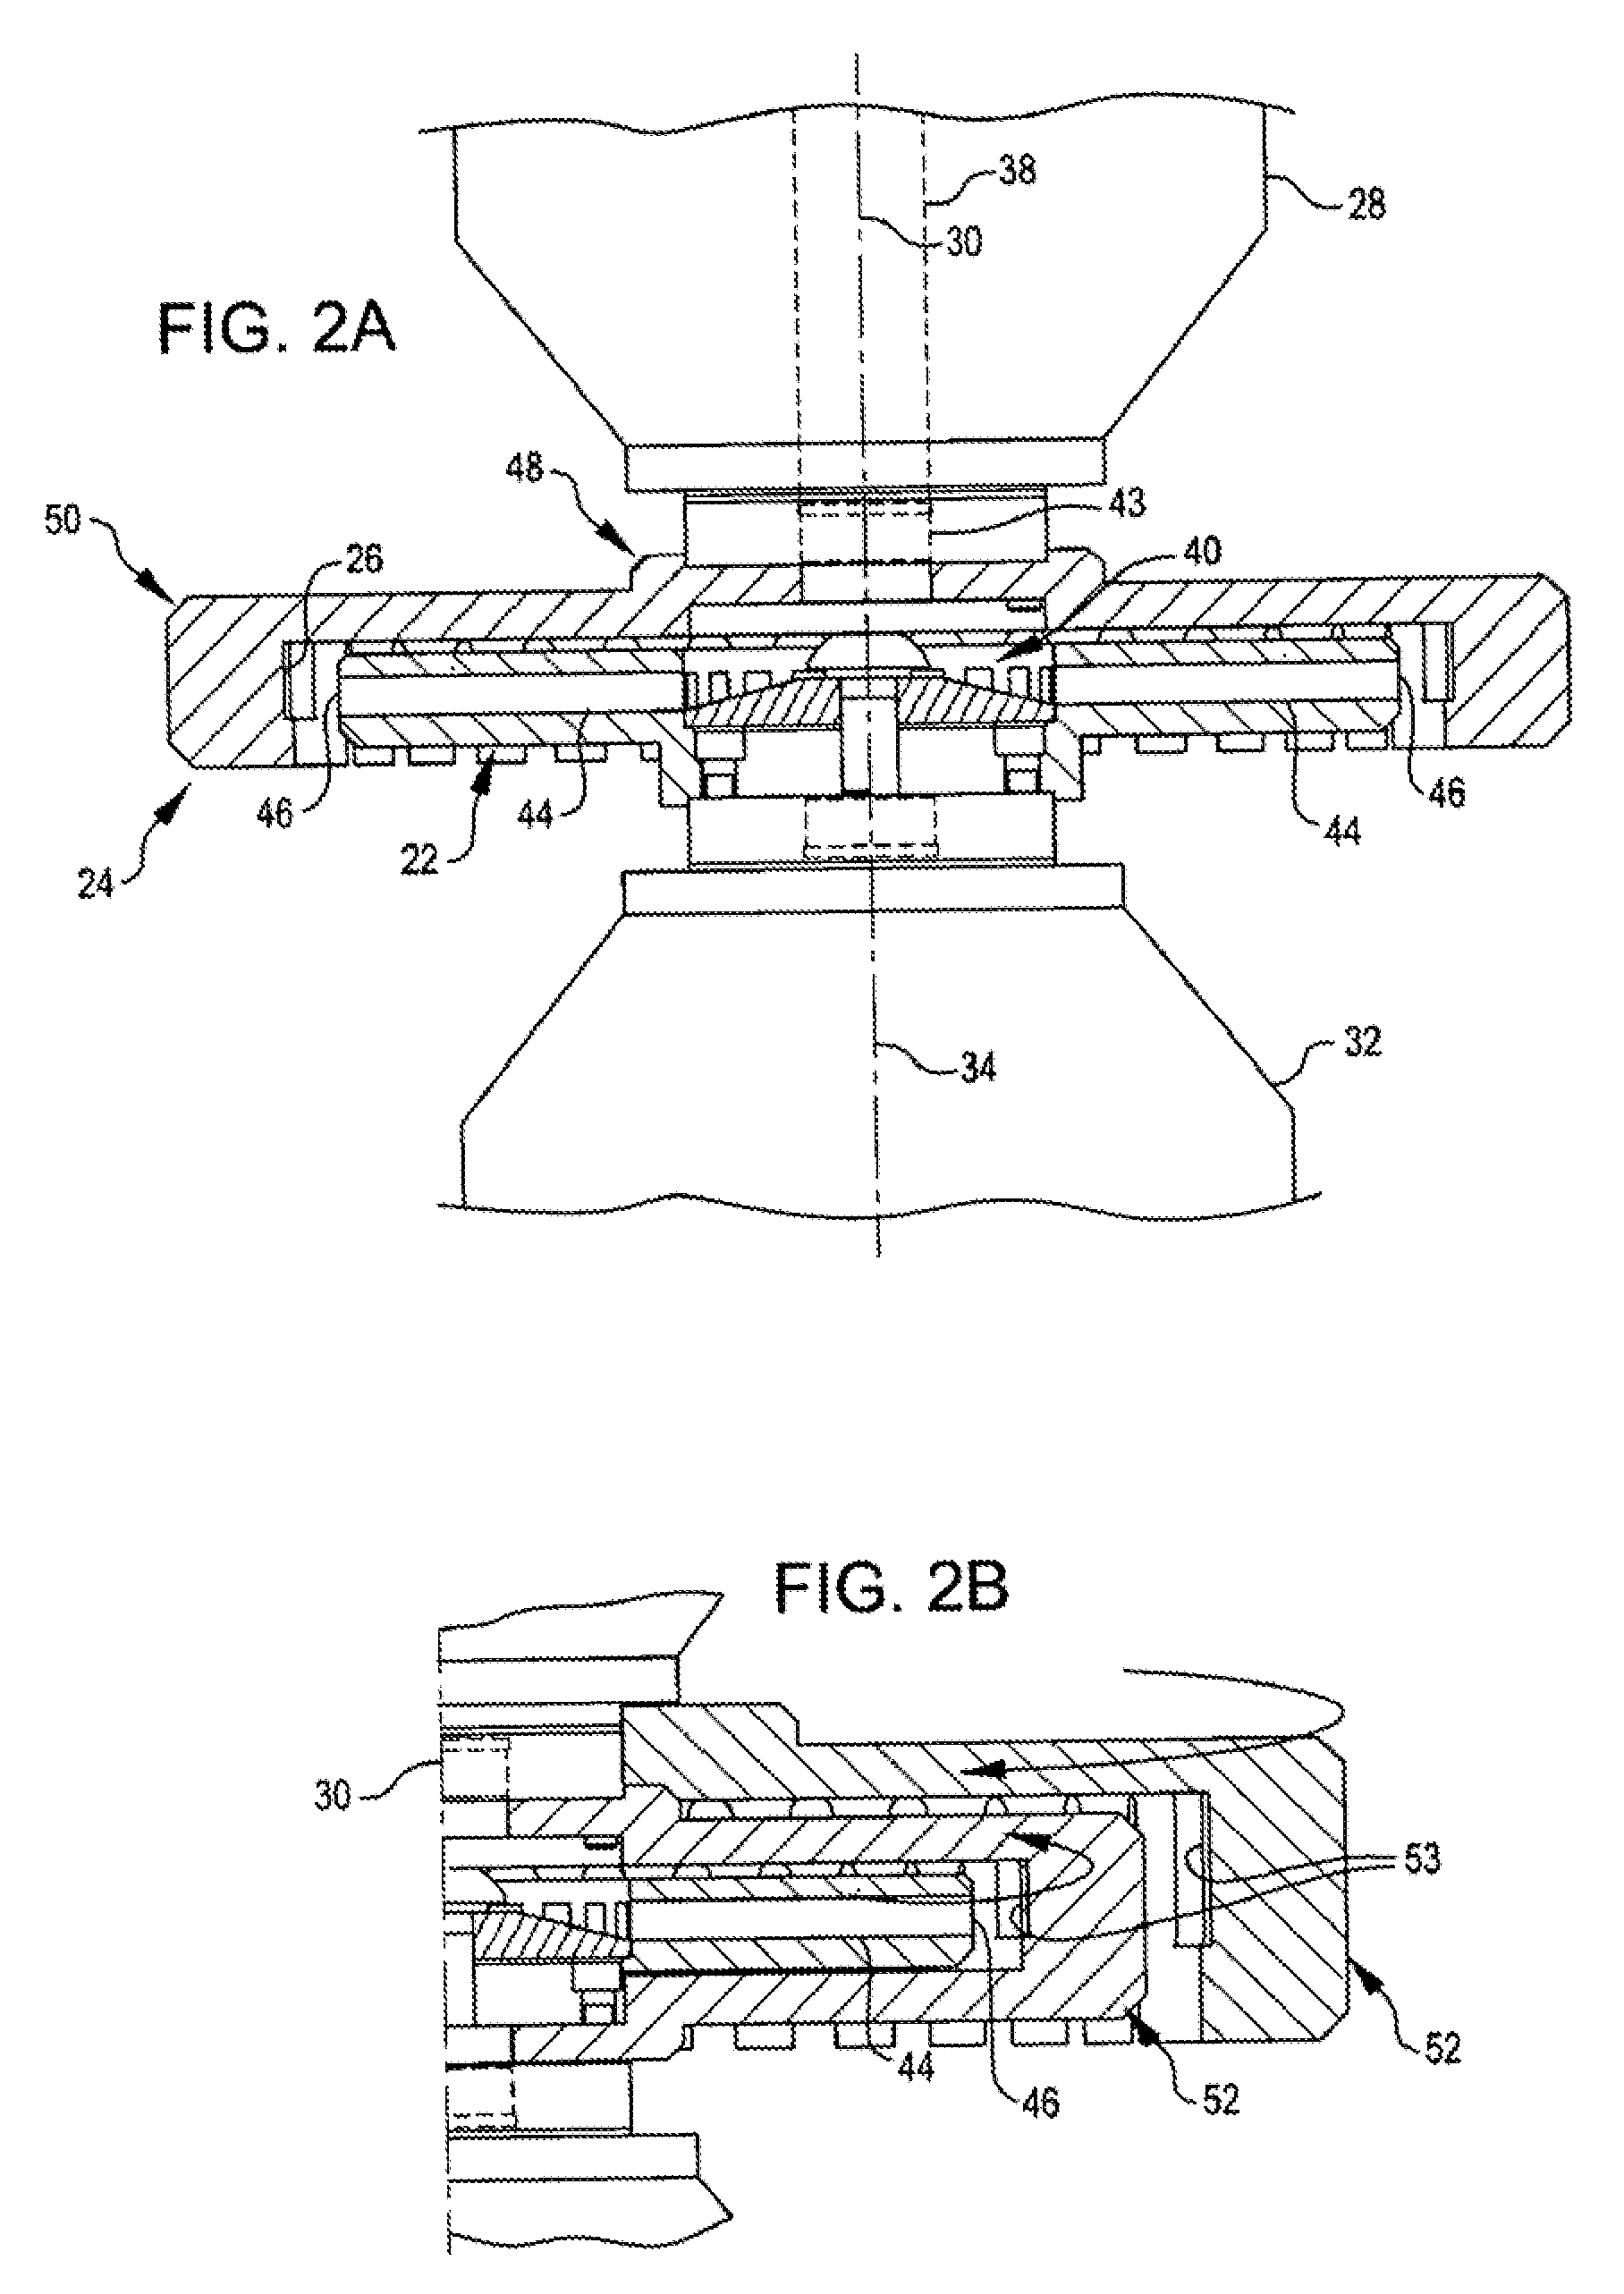 Apparatus and methodology for comminuting materials